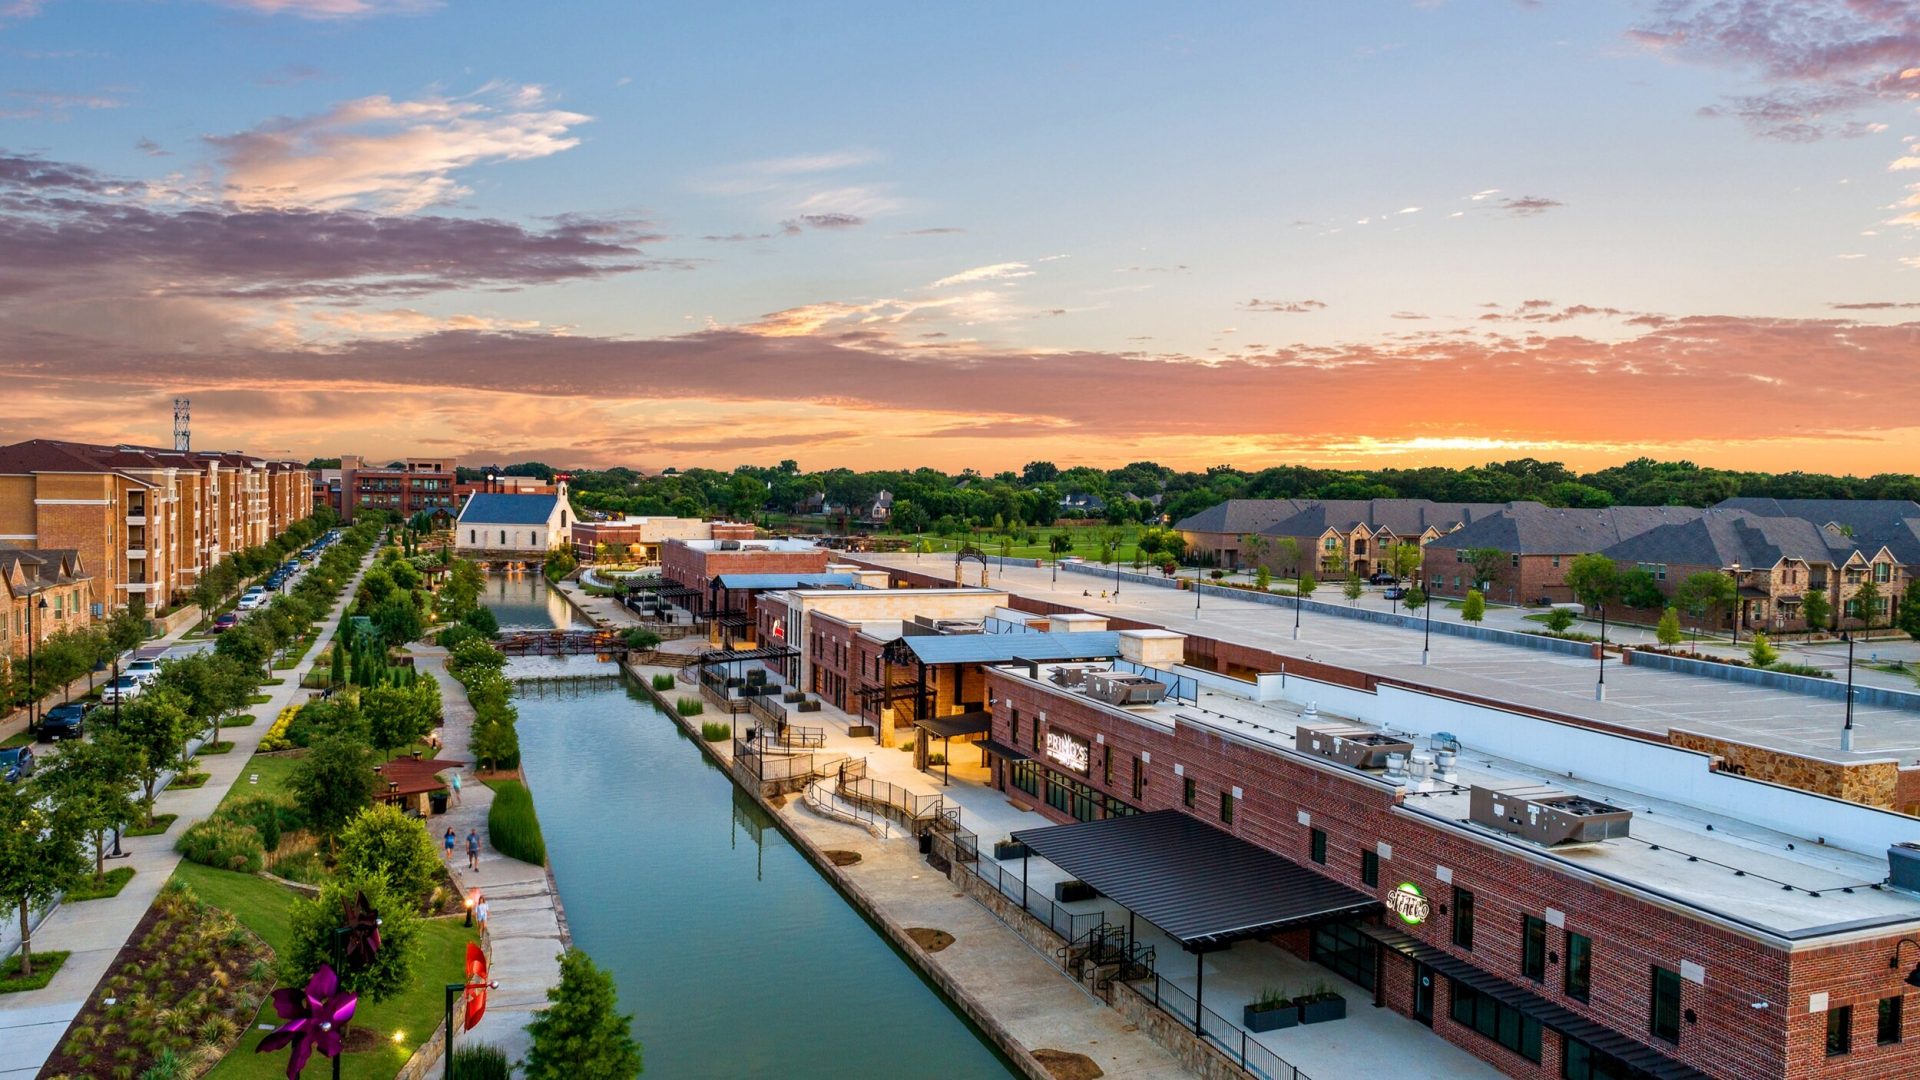 Top 10 Things to Do in Flower Mound, Texas [Updated for 2021